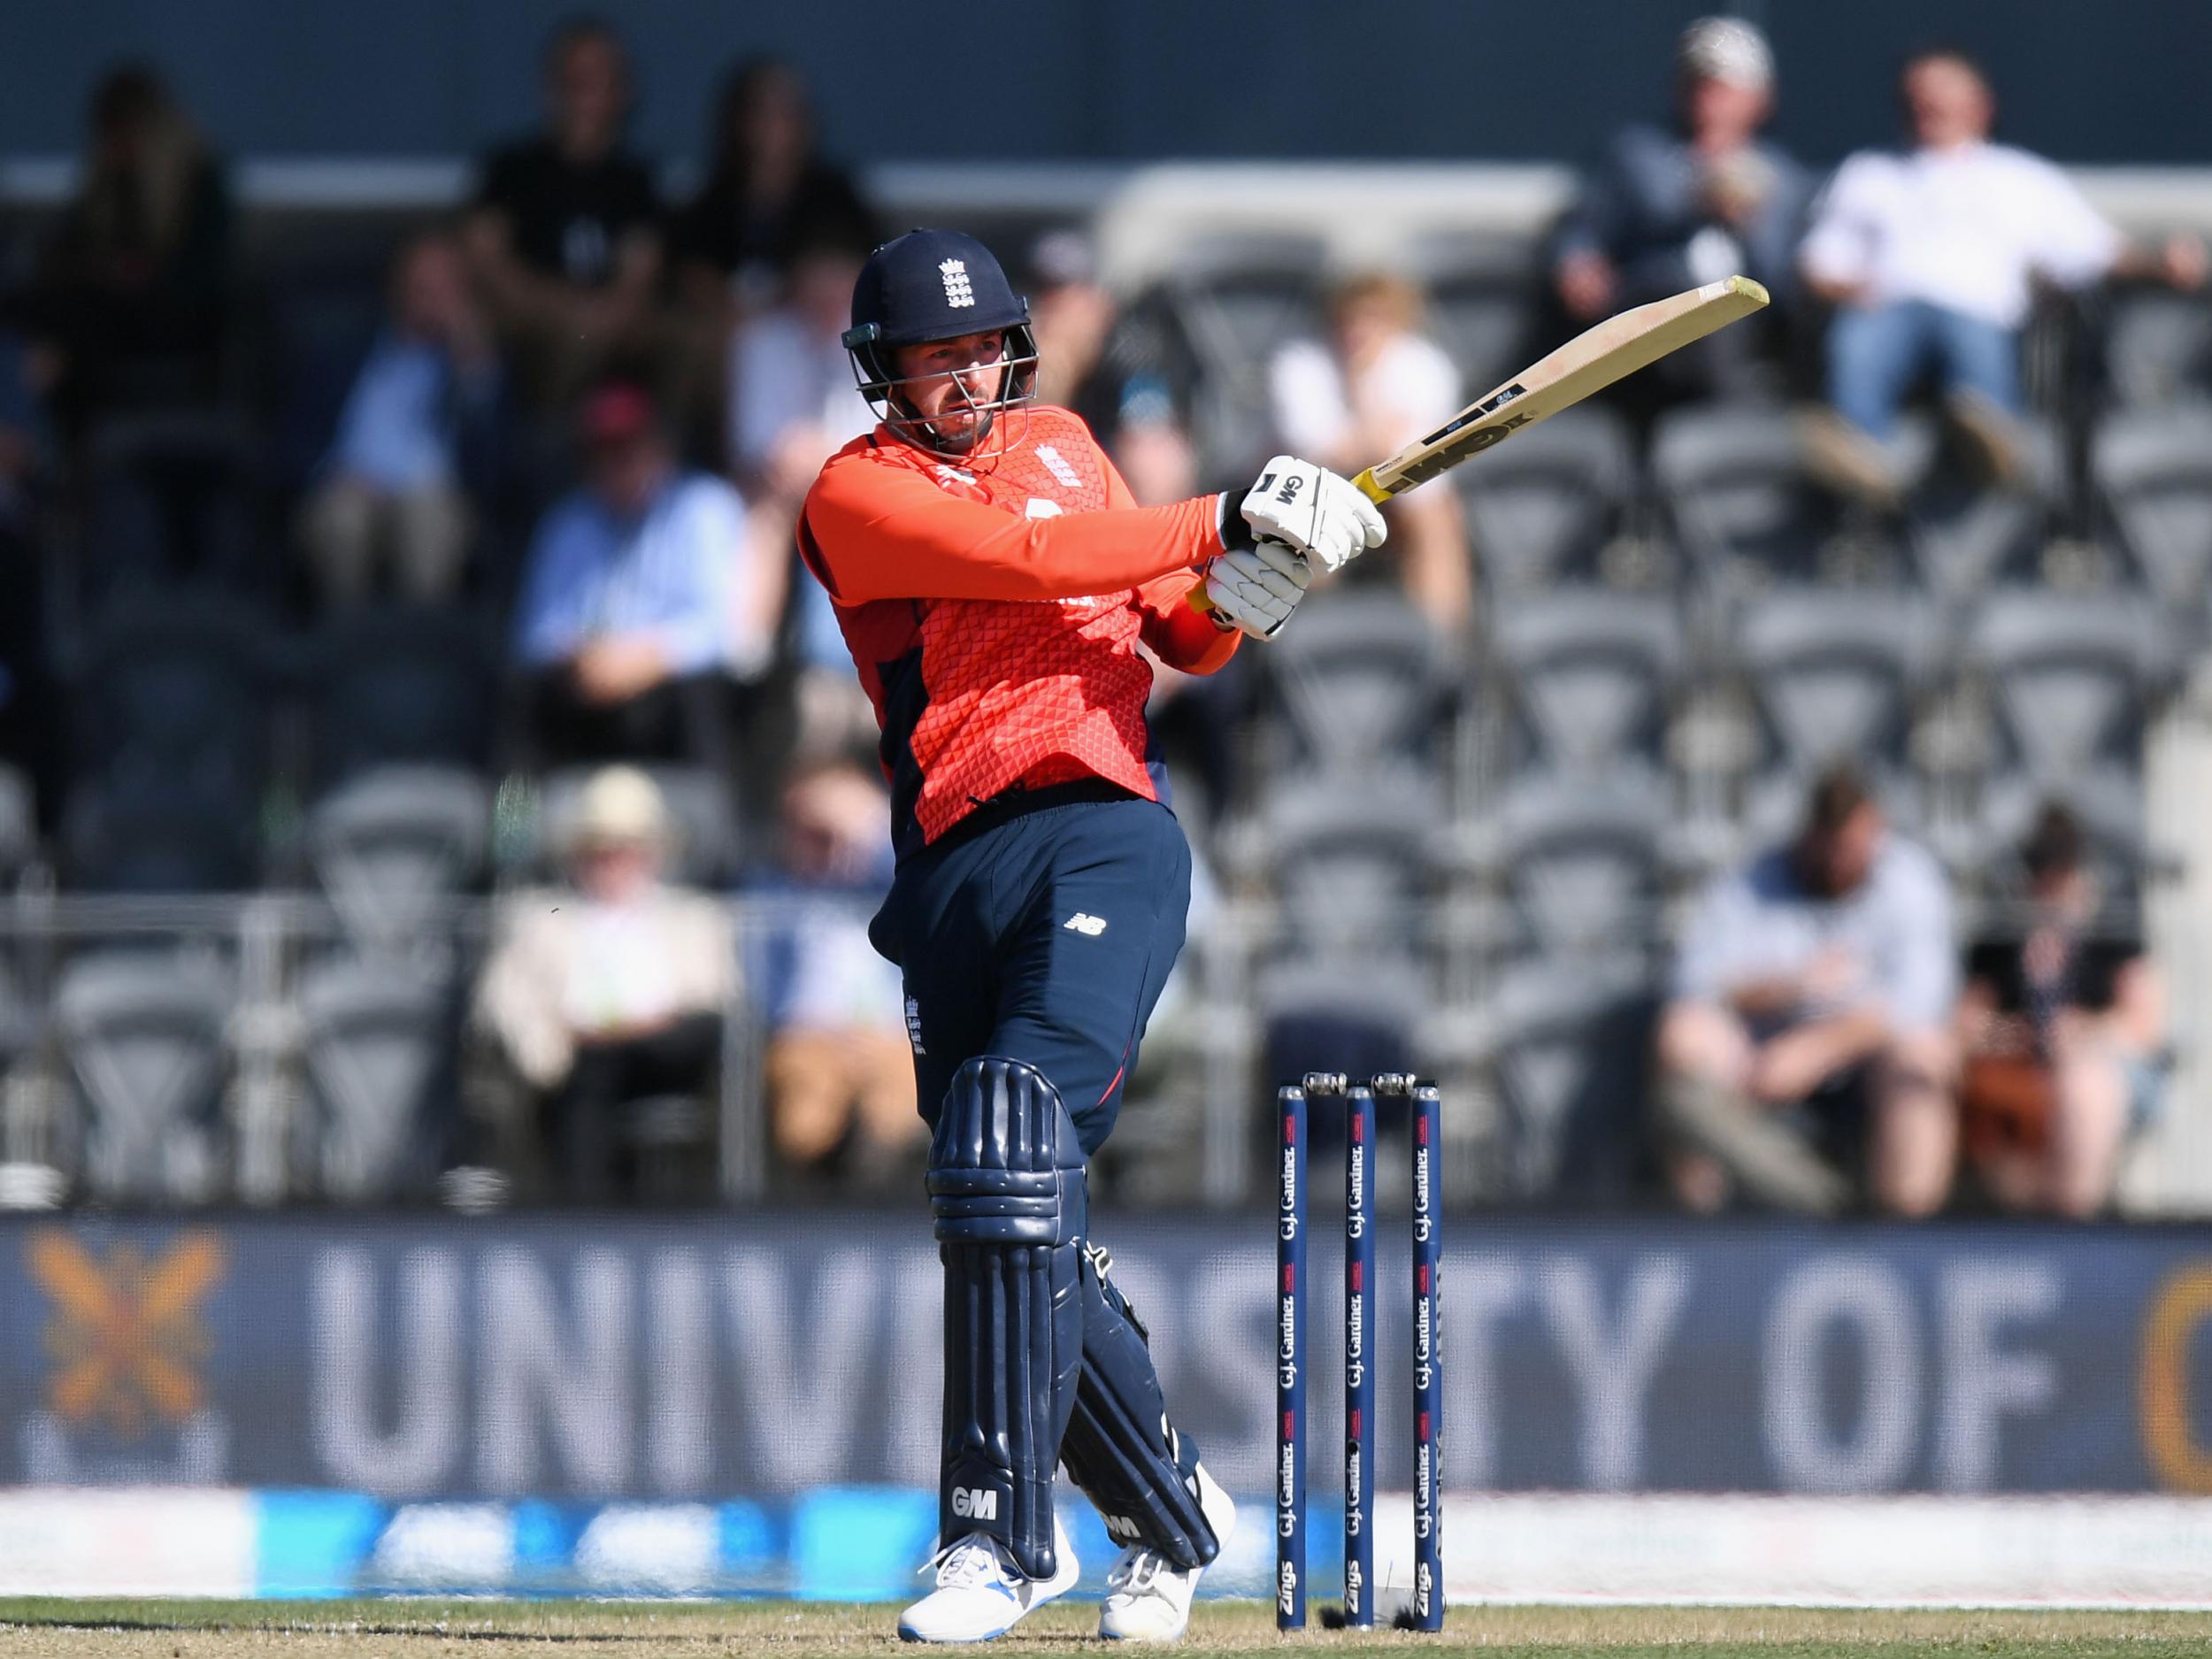 James Vince made 50 as England eased to victory in the first T20 against New Zealand